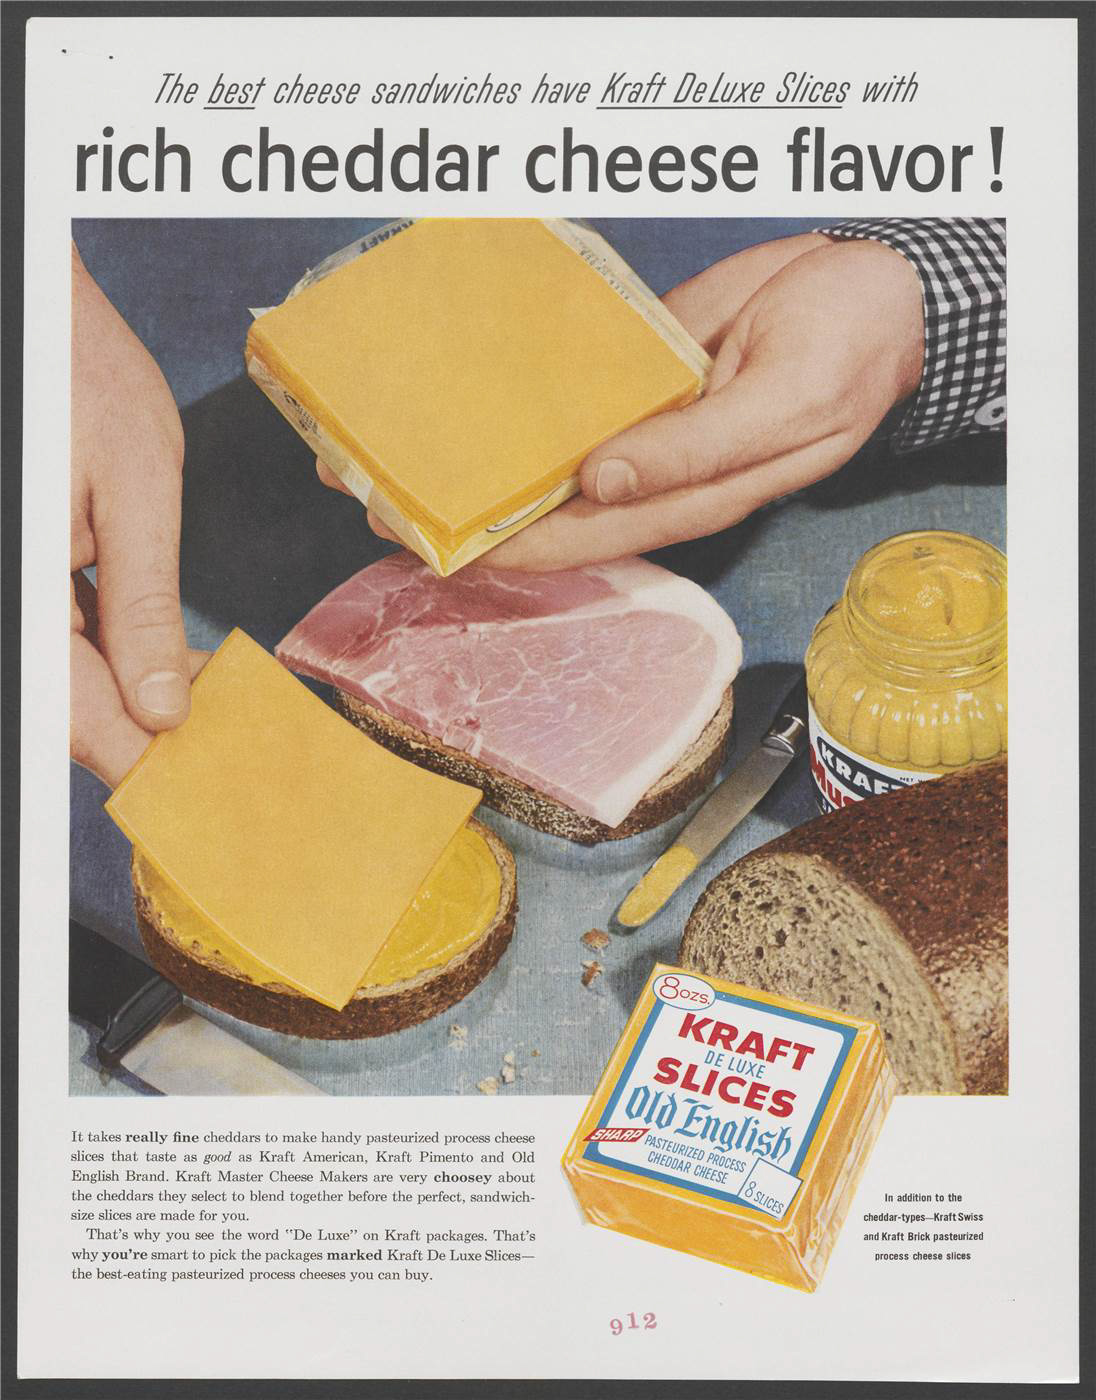 "The best cheese sandwiches have Kraft De Luxe Slices with rich cheddar cheese flavor!" Photograph of a cheese and ham sandwich being prepared with Kraft mustard and slices of Kraft cheese. The packaging for Kraft De Luxe Slices is shown below. Stresses the quality of Kraft cheeses.